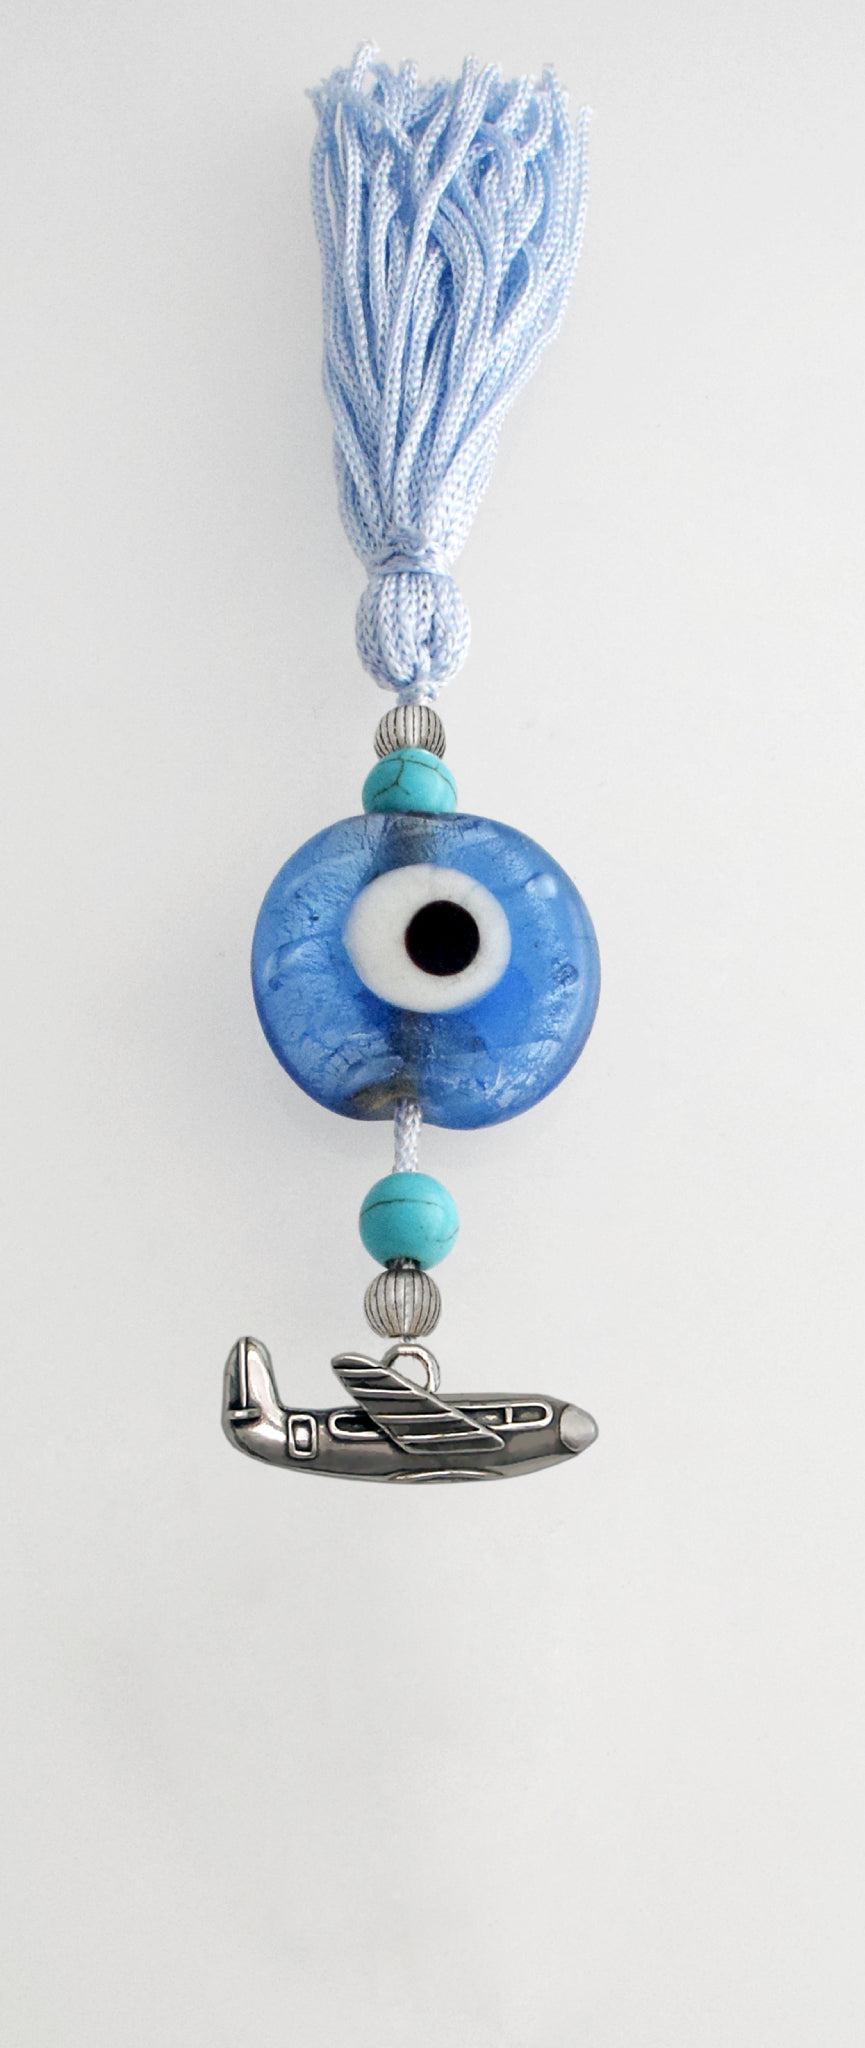 Evil Eye Charm on a tassel, House decoration, holiday decor, welcome gift, silver charm, Airplane Charm - ELEFTHERIOU EL